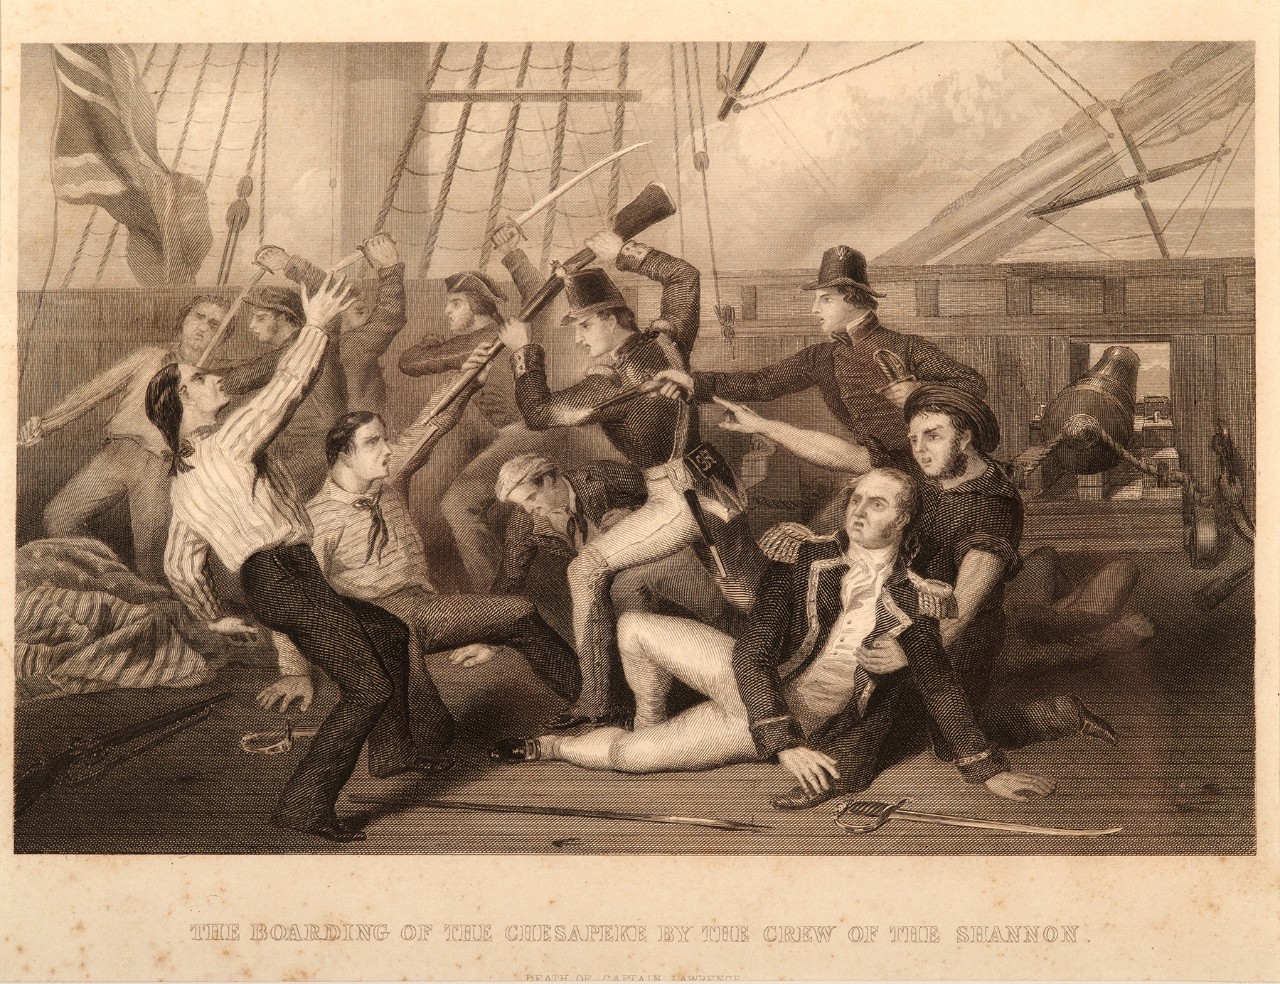 An officer laying on the deck being held by a sailor behind them American sailors fighting British sailors